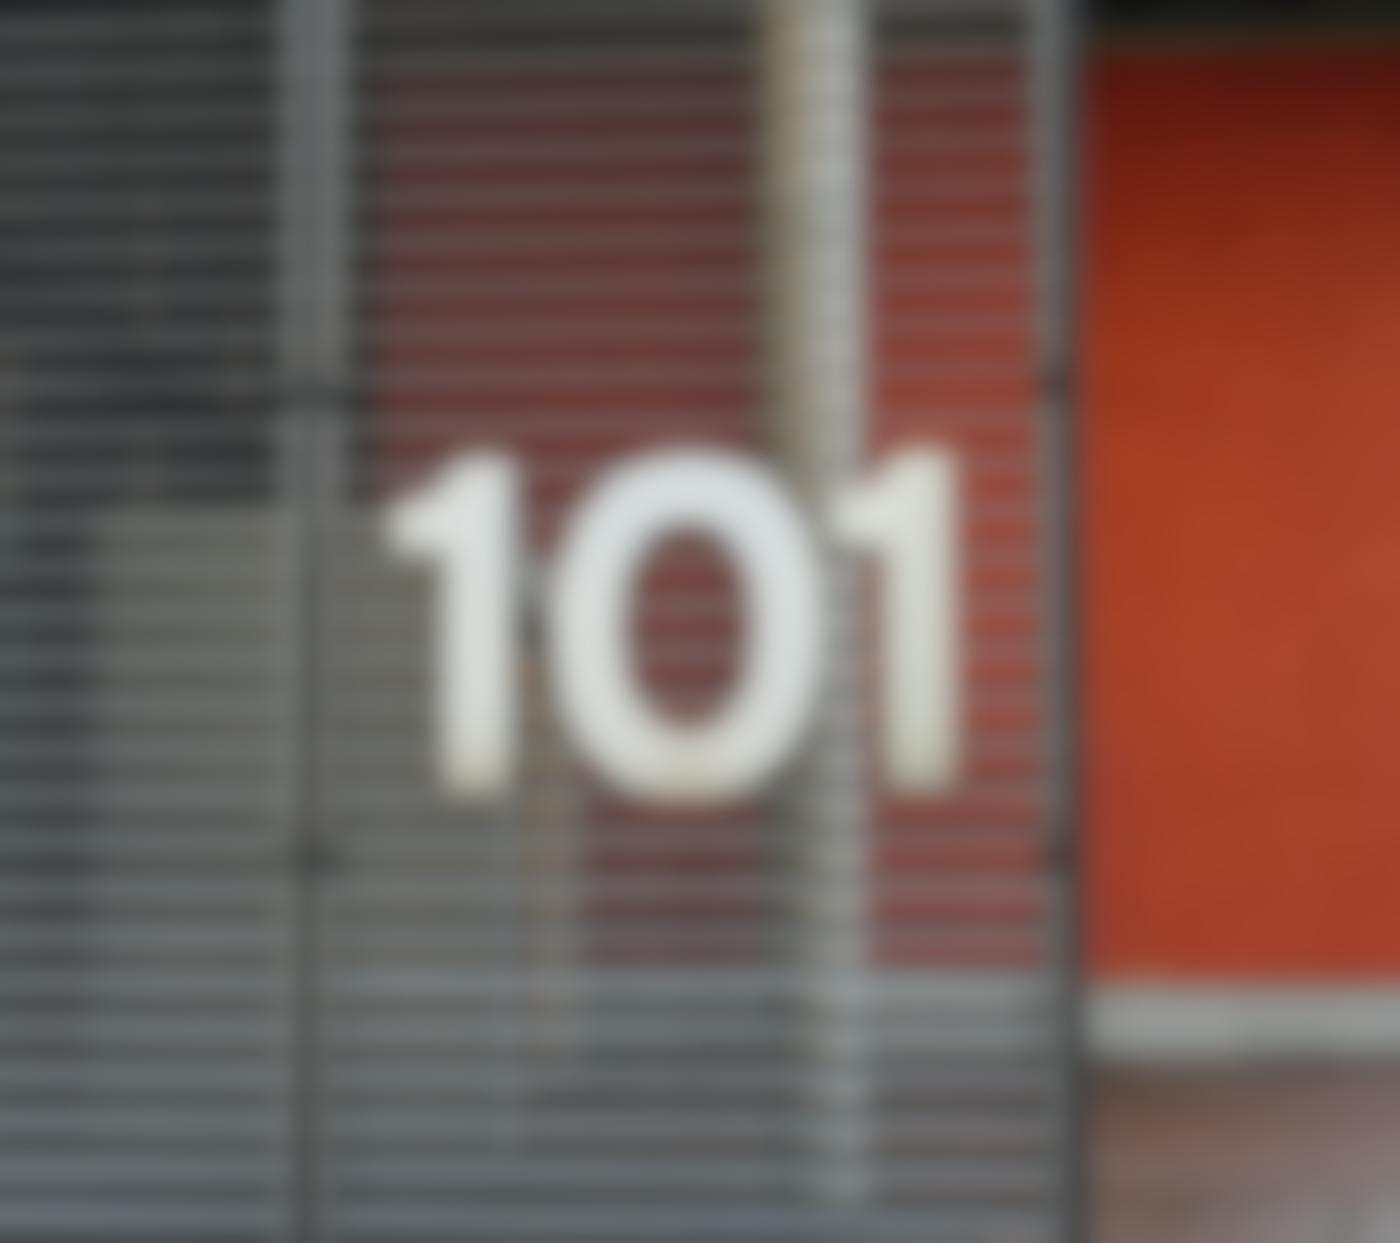 A slat window with the number 101 on it